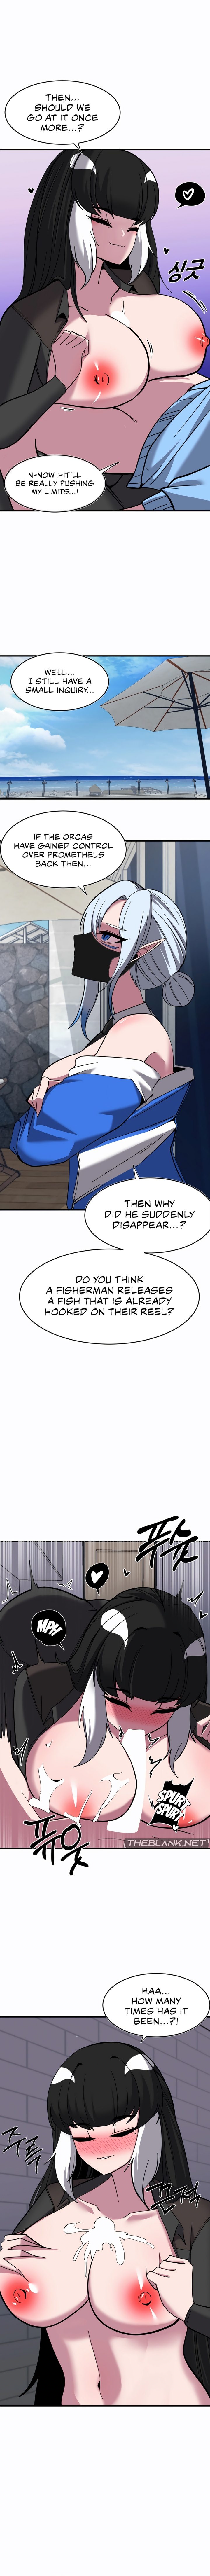 Double Life of Gukbap - Chapter 12 Page 7